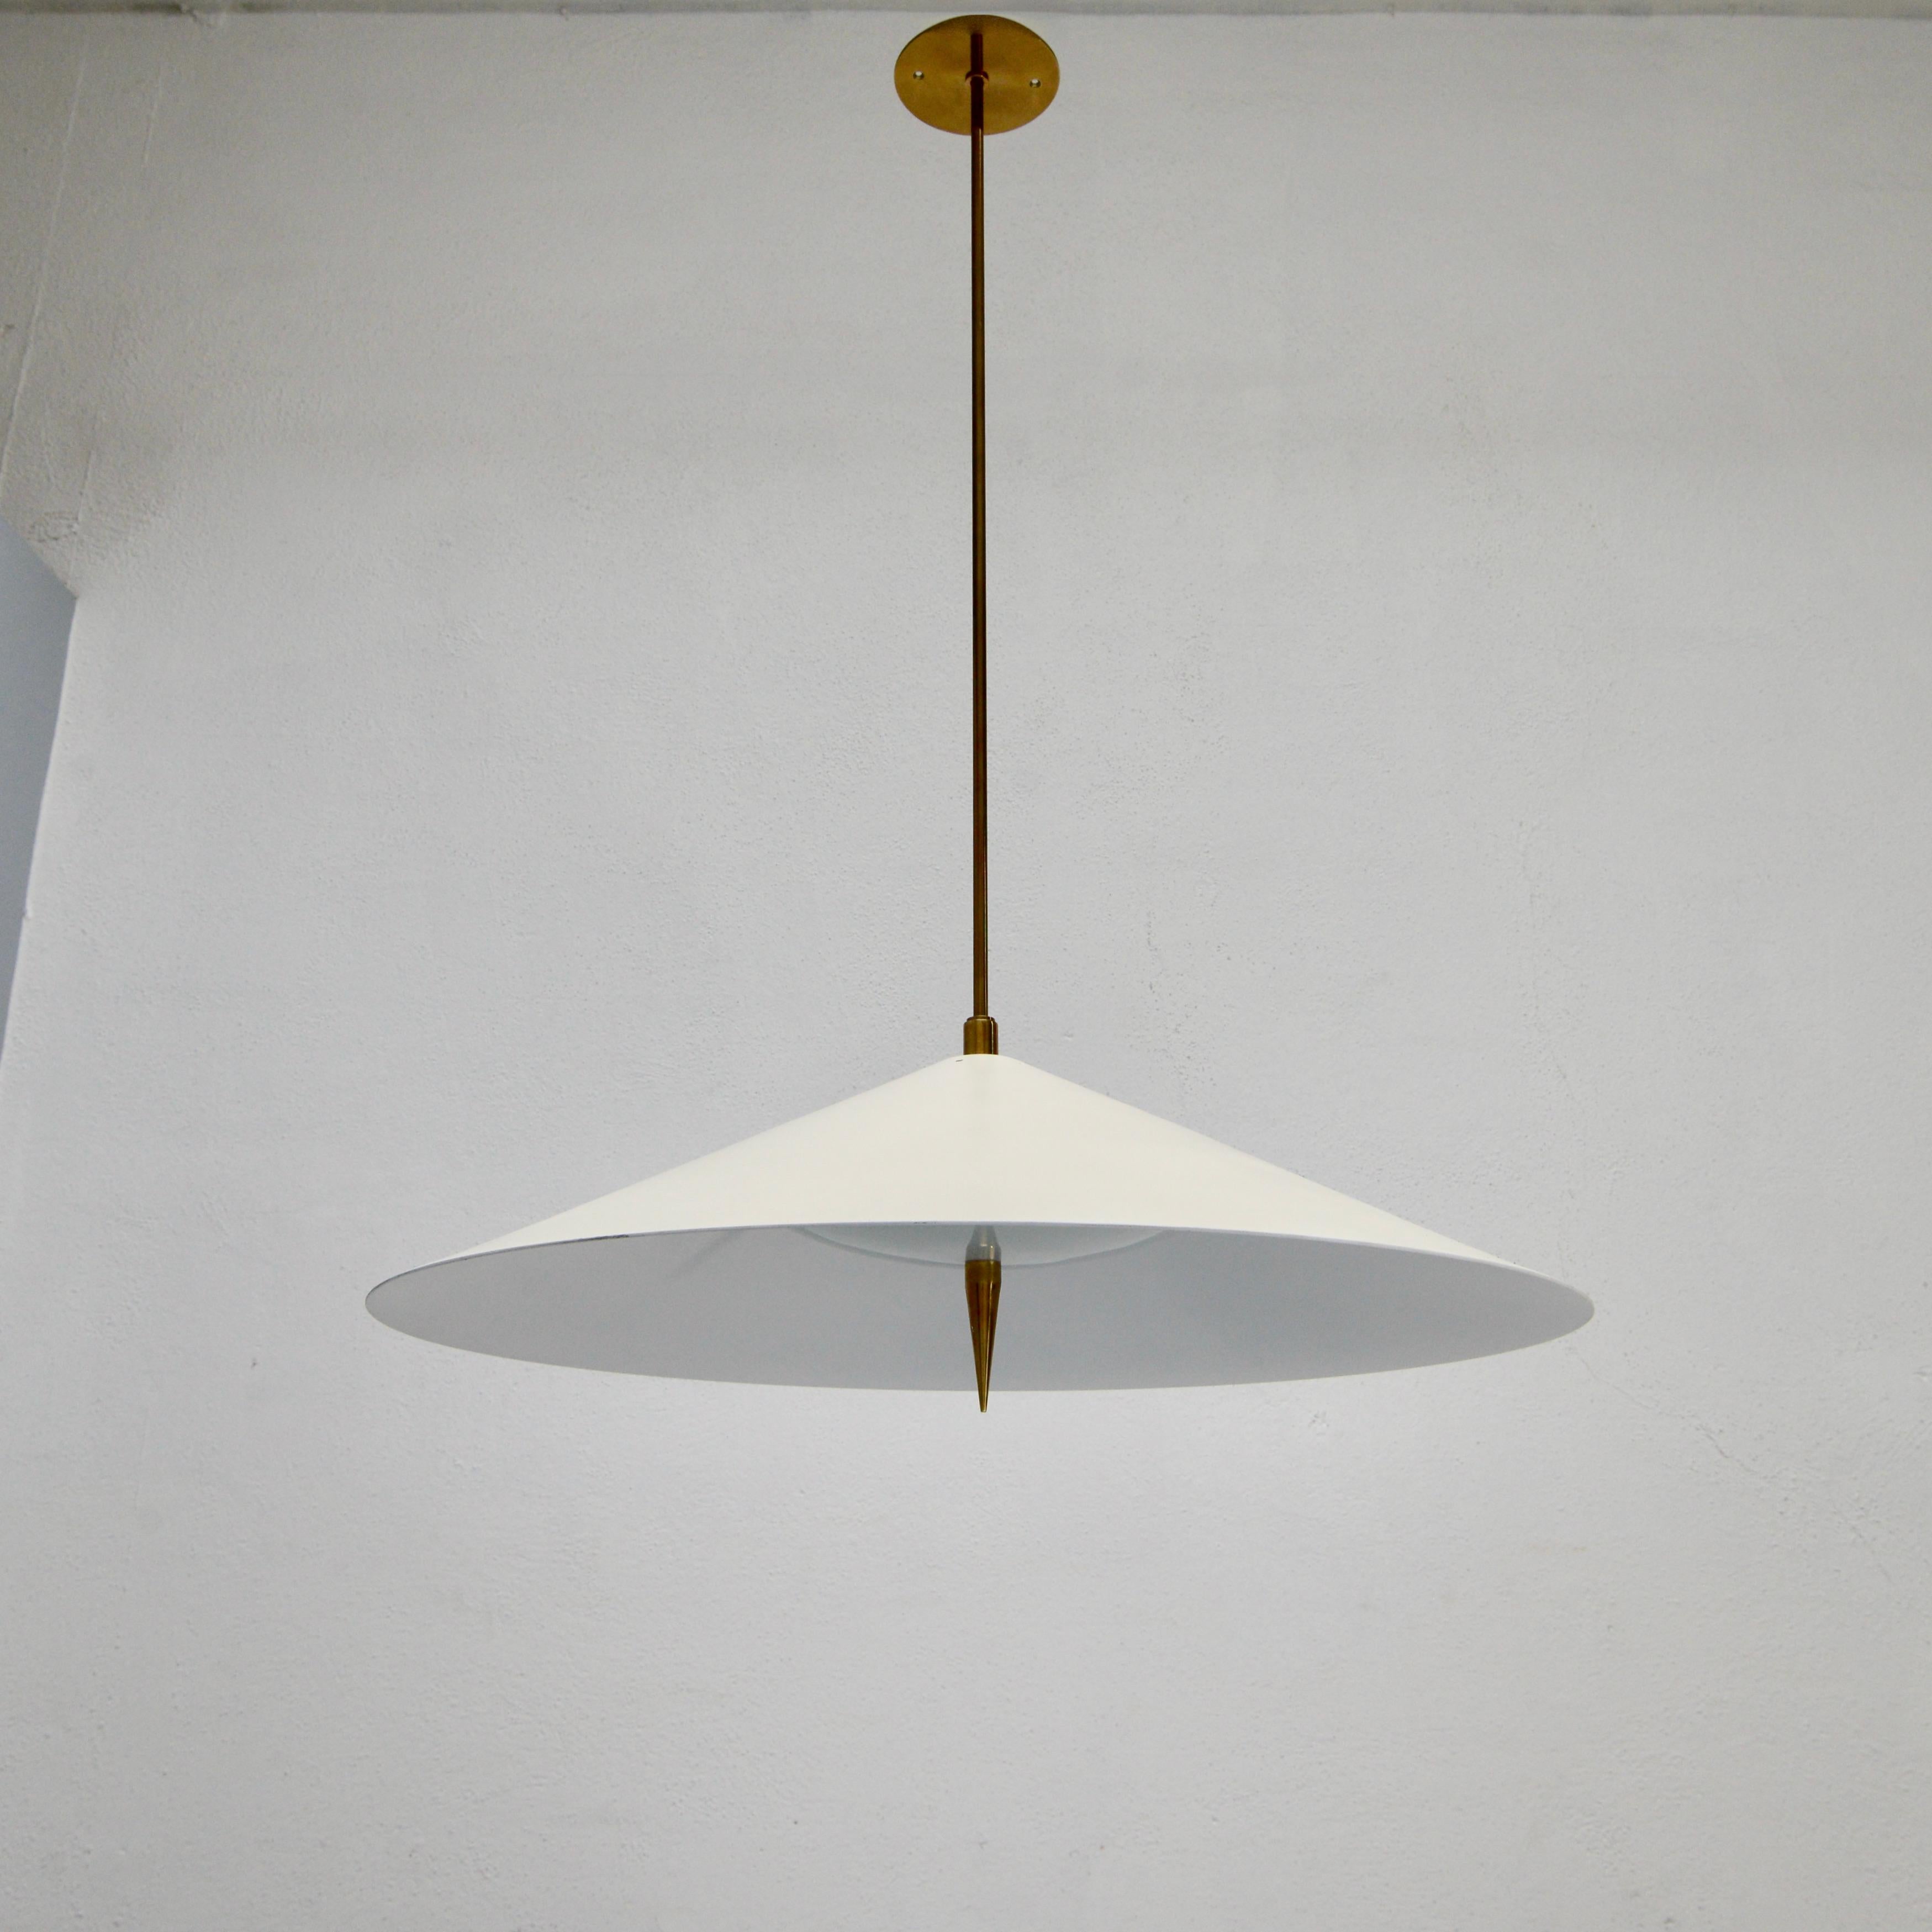 Part of Lumfardo Luminaries contemporary collection, the LUsaucer pendant fixture is a classic Italian mid century modern design made to order. Crafted from patinated brass, painted aluminum and glass. This fixture can be wired for any worldwide